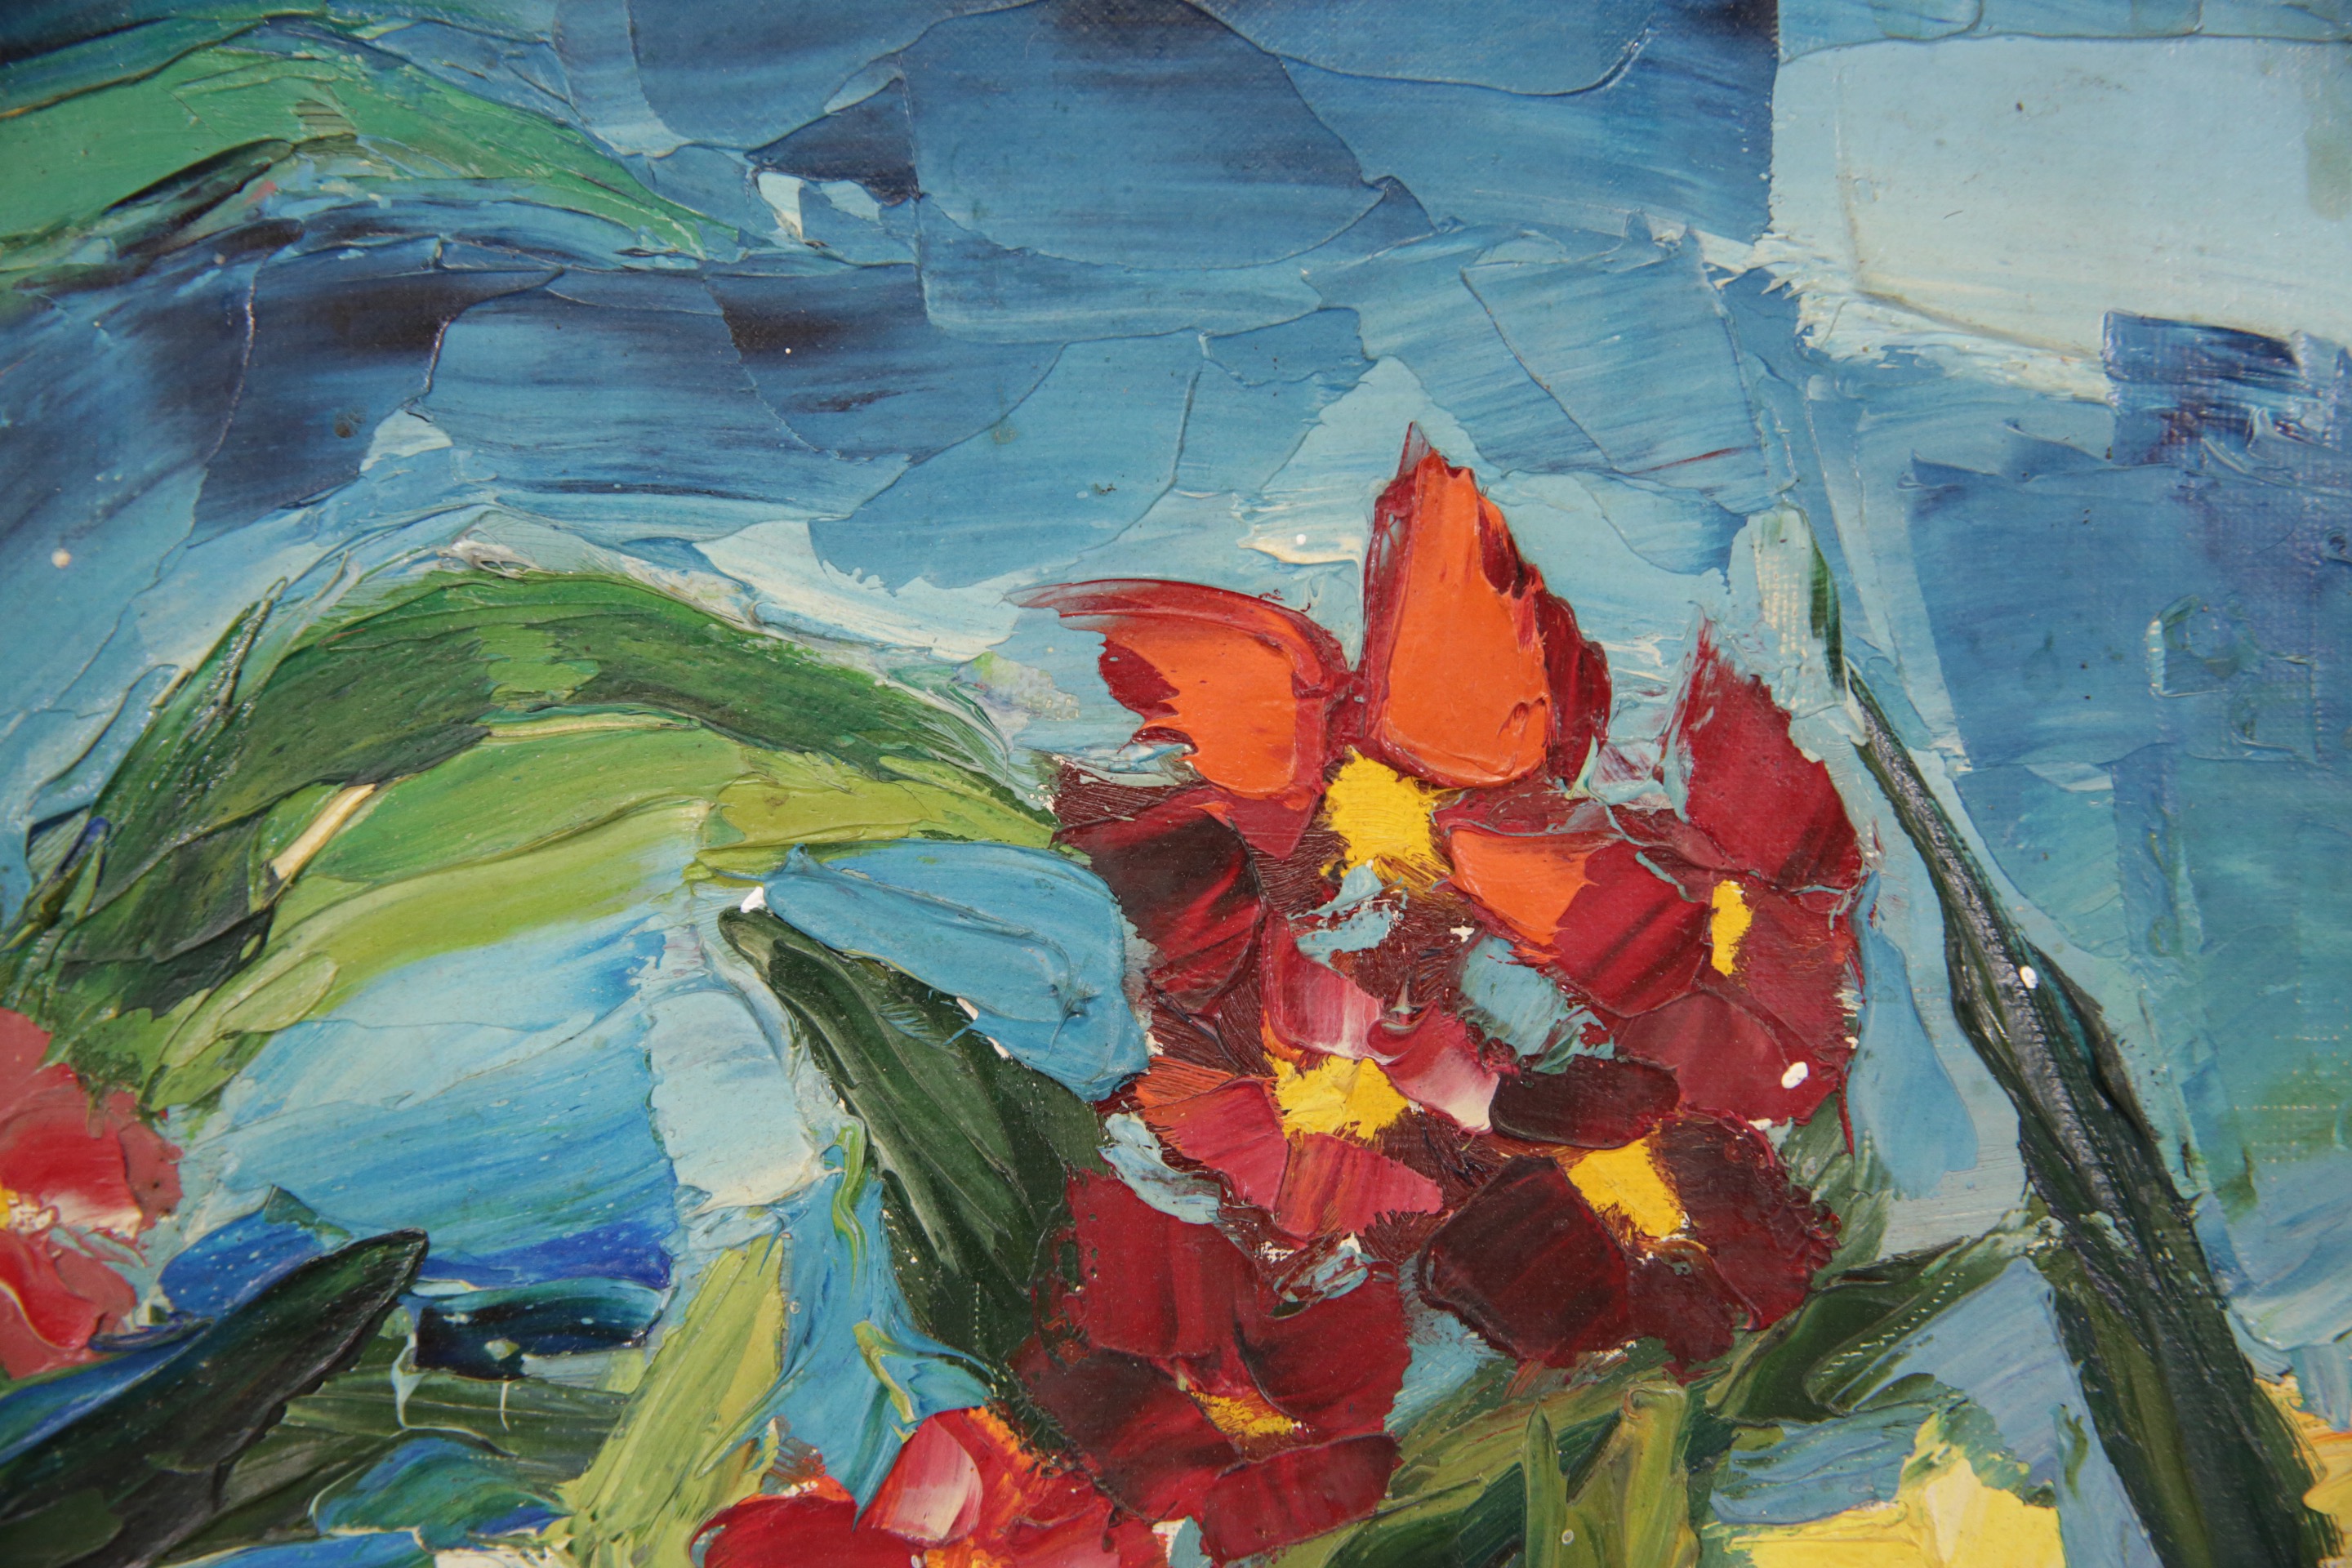 Noel CHARLEY (act.c.1900) "Nature morte aux fleurs" 1962, oil on canvas, French painting, 1960s. - Image 3 of 4